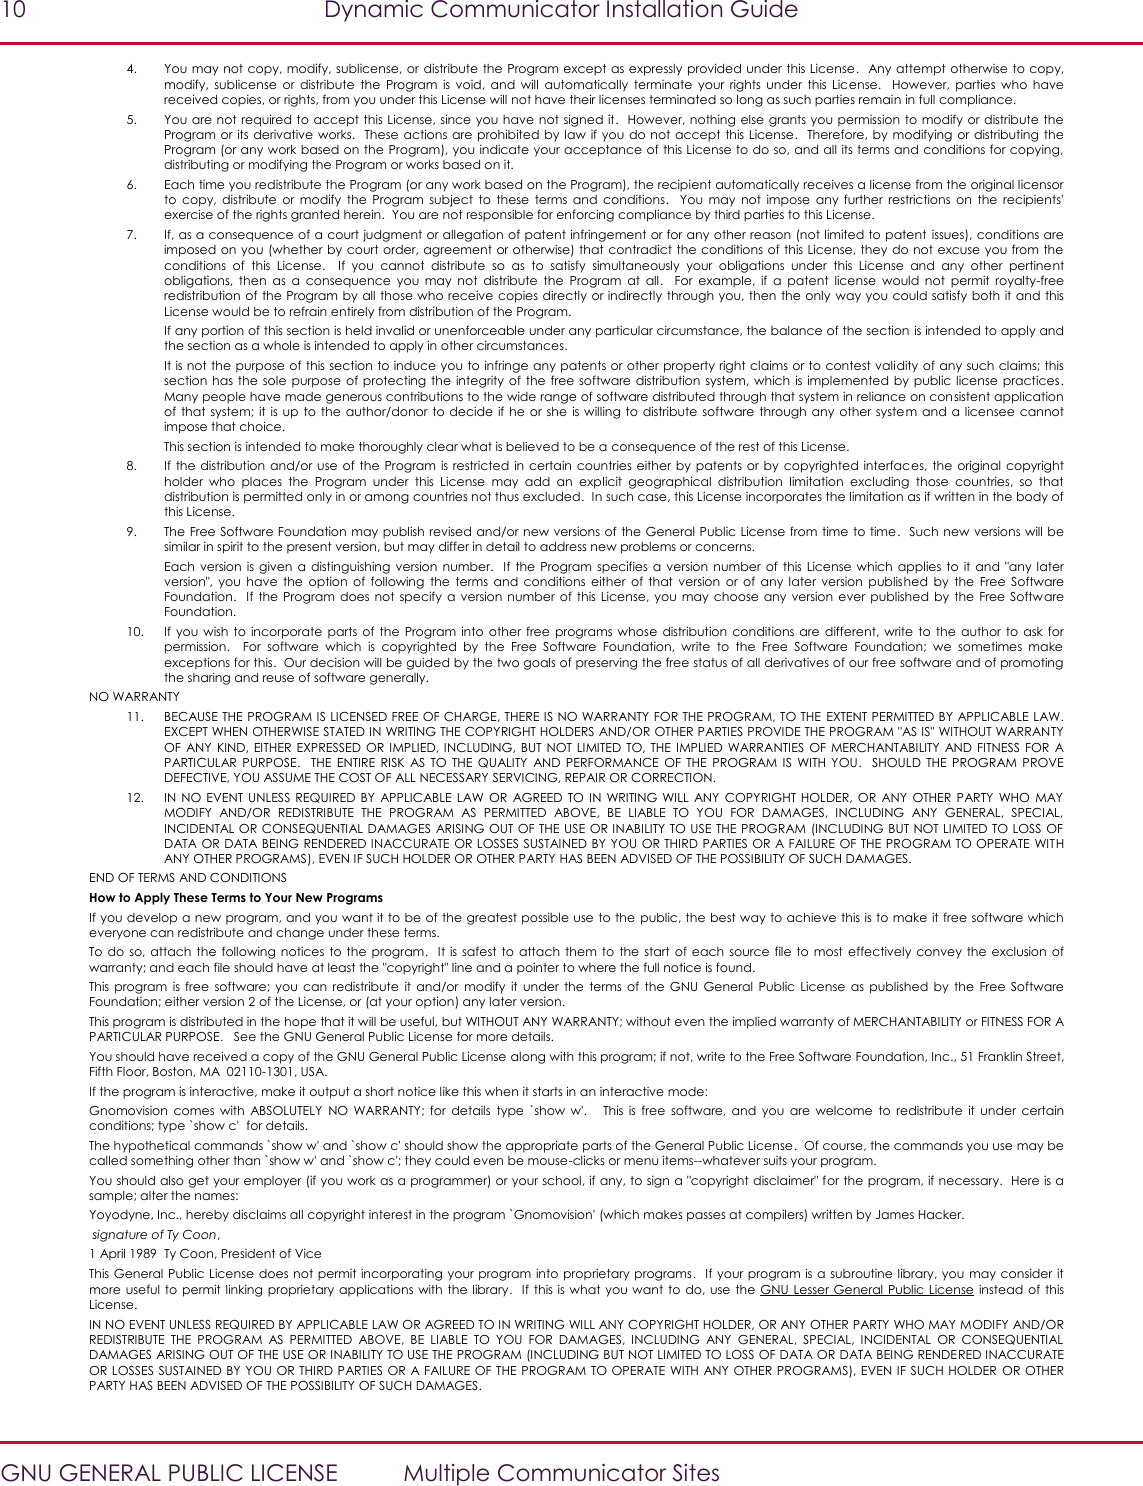 10  Dynamic Communicator Installation Guide   GNU GENERAL PUBLIC LICENSE  Multiple Communicator Sites 4. You may not copy, modify, sublicense, or distribute the Program except as expressly provided under this License.  Any attempt otherwise to copy, modify,  sublicense  or  distribute  the  Program  is  void,  and  will  automatically  terminate  your  rights  under  this  License.    However,  parties who  have received copies, or rights, from you under this License will not have their licenses terminated so long as such parties remain in full compliance. 5. You are not required to accept this License, since you have not signed it.  However, nothing else grants you permission to modify or distribute the Program or  its derivative works.  These actions are prohibited by law if you do not accept this License.  Therefore, by modifying  or distributing the Program (or any work based on the Program), you indicate your acceptance of this License to do so, and all its terms and conditions for copying, distributing or modifying the Program or works based on it. 6. Each time you redistribute the Program (or any work based on the Program), the recipient automatically receives a license from the original licensor to  copy,  distribute  or  modify  the  Program  subject  to  these  terms  and  conditions.    You  may  not  impose  any  further  restrictions  on  the  recipients&apos; exercise of the rights granted herein.  You are not responsible for enforcing compliance by third parties to this License. 7. If, as a consequence of a court judgment or allegation of patent infringement or for any other reason (not limited to patent  issues), conditions are imposed on you (whether by court order, agreement or otherwise) that contradict the conditions of this License, they do not excuse you from the conditions  of  this  License.    If  you  cannot  distribute  so  as  to  satisfy  simultaneously  your  obligations  under  this  License  and  any  other  pertinent obligations,  then  as  a  consequence  you  may  not  distribute  the  Program  at  all.    For  example,  if  a  patent  license  would  not  permit  royalty-free redistribution of the Program by all those who receive copies directly or indirectly through you, then the only way you could satisfy both it and this License would be to refrain entirely from distribution of the Program. If any portion of this section is held invalid or unenforceable under any particular circumstance, the balance of the section is intended to apply and the section as a whole is intended to apply in other circumstances. It is not the purpose of this section to induce you to infringe any patents or other property right claims or to contest validity of any such claims; this section has the  sole purpose  of protecting the  integrity of  the free  software distribution system, which  is  implemented  by  public license  practices.  Many people have made generous contributions to the wide range of software distributed through that system in reliance on consistent application of that  system;  it  is  up to the author/donor to  decide  if he  or she  is willing to  distribute software through any  other system  and a  licensee cannot impose that choice. This section is intended to make thoroughly clear what is believed to be a consequence of the rest of this License. 8. If the  distribution  and/or  use of the  Program is restricted  in certain countries either  by patents or by  copyrighted interfaces,  the original copyright holder  who  places  the  Program  under  this  License  may  add  an  explicit  geographical  distribution  limitation  excluding  those  countries,  so  that distribution is permitted only in or among countries not thus excluded.  In such case, this License incorporates the limitation as if written in the body of this License. 9. The Free Software Foundation may publish revised and/or new versions of the General Public License from time to time.  Such new versions will be similar in spirit to the present version, but may differ in detail to address new problems or concerns. Each  version is given  a distinguishing version  number.   If  the  Program specifies a version  number of  this License which  applies to  it  and &quot;any later version&quot;,  you  have  the  option of  following  the  terms  and  conditions  either  of  that  version  or  of  any later  version  published  by  the  Free  Software Foundation.   If  the Program  does  not specify a  version number  of this License,  you may  choose any  version  ever published by  the Free  Software Foundation. 10. If you  wish  to incorporate  parts  of the  Program into  other  free  programs whose  distribution  conditions  are different,  write to  the  author  to ask  for permission.    For  software  which  is  copyrighted  by  the  Free  Software  Foundation,  write  to  the  Free  Software  Foundation;  we  sometimes  make exceptions for this.  Our decision will be guided by the two goals of preserving the free status of all derivatives of our free software and of promoting the sharing and reuse of software generally. NO WARRANTY 11. BECAUSE THE PROGRAM IS LICENSED FREE OF CHARGE, THERE IS NO WARRANTY FOR THE PROGRAM, TO THE EXTENT PERMITTED BY APPLICABLE LAW.  EXCEPT WHEN OTHERWISE STATED IN WRITING THE COPYRIGHT HOLDERS AND/OR OTHER PARTIES PROVIDE THE PROGRAM &quot;AS IS&quot; WITHOUT WARRANTY OF  ANY KIND,  EITHER EXPRESSED  OR IMPLIED, INCLUDING,  BUT NOT LIMITED TO, THE  IMPLIED WARRANTIES  OF MERCHANTABILITY  AND FITNESS  FOR  A PARTICULAR  PURPOSE.    THE  ENTIRE  RISK  AS TO  THE  QUALITY  AND  PERFORMANCE  OF THE  PROGRAM  IS  WITH YOU.    SHOULD  THE  PROGRAM  PROVE DEFECTIVE, YOU ASSUME THE COST OF ALL NECESSARY SERVICING, REPAIR OR CORRECTION. 12. IN NO  EVENT UNLESS  REQUIRED  BY APPLICABLE LAW  OR  AGREED TO  IN  WRITING WILL  ANY COPYRIGHT HOLDER,  OR  ANY  OTHER PARTY WHO  MAY MODIFY  AND/OR  REDISTRIBUTE  THE  PROGRAM  AS  PERMITTED  ABOVE,  BE  LIABLE  TO  YOU  FOR  DAMAGES,  INCLUDING  ANY  GENERAL,  SPECIAL, INCIDENTAL OR CONSEQUENTIAL DAMAGES  ARISING OUT OF THE USE OR INABILITY TO USE THE PROGRAM (INCLUDING BUT NOT LIMITED TO LOSS OF DATA OR DATA BEING RENDERED INACCURATE OR LOSSES SUSTAINED BY YOU OR THIRD PARTIES OR A FAILURE OF THE PROGRAM TO OPERATE WITH ANY OTHER PROGRAMS), EVEN IF SUCH HOLDER OR OTHER PARTY HAS BEEN ADVISED OF THE POSSIBILITY OF SUCH DAMAGES. END OF TERMS AND CONDITIONS How to Apply These Terms to Your New Programs If you develop a new program, and you want it to be of the greatest possible use to the  public, the best way to achieve this is to make it free software which everyone can redistribute and change under these terms. To do  so, attach  the following  notices  to  the program.   It is  safest  to attach  them to  the  start of each  source file  to  most effectively  convey the exclusion of warranty; and each file should have at least the &quot;copyright&quot; line and a pointer to where the full notice is found. This program  is  free  software;  you  can  redistribute  it and/or  modify  it  under  the  terms of  the  GNU  General  Public License  as published  by  the  Free  Software Foundation; either version 2 of the License, or (at your option) any later version. This program is distributed in the hope that it will be useful, but WITHOUT ANY WARRANTY; without even the implied warranty of MERCHANTABILITY or FITNESS FOR A PARTICULAR PURPOSE.   See the GNU General Public License for more details. You should have received a copy of the GNU General Public License along with this program; if not, write to the Free Software Foundation, Inc., 51 Franklin Street, Fifth Floor, Boston, MA  02110-1301, USA. If the program is interactive, make it output a short notice like this when it starts in an interactive mode: Gnomovision  comes  with  ABSOLUTELY  NO  WARRANTY;  for  details  type  `show  w&apos;.      This  is  free  software,  and  you  are  welcome  to  redistribute  it  under  certain conditions; type `show c&apos;  for details. The hypothetical commands `show w&apos; and `show c&apos; should show the appropriate parts of the General Public License.  Of course, the commands you use may be called something other than `show w&apos; and `show c&apos;; they could even be mouse-clicks or menu items--whatever suits your program. You should also get your employer (if you work as a programmer) or your school, if any, to sign a &quot;copyright disclaimer&quot; for the program, if necessary.  Here is a sample; alter the names: Yoyodyne, Inc., hereby disclaims all copyright interest in the program `Gnomovision&apos; (which makes passes at compilers) written by James Hacker.   signature of Ty Coon,  1 April 1989  Ty Coon, President of Vice This General Public License does not permit incorporating your program  into proprietary programs.   If your program is a subroutine library, you may consider it more useful to  permit linking proprietary applications with the library.  If this is  what you want to do, use the  GNU Lesser General Public License  instead of  this License. IN NO EVENT UNLESS REQUIRED BY APPLICABLE LAW OR AGREED TO IN WRITING WILL ANY COPYRIGHT HOLDER, OR ANY OTHER PARTY WHO MAY MODIFY AND/OR REDISTRIBUTE  THE  PROGRAM  AS  PERMITTED  ABOVE,  BE  LIABLE  TO  YOU  FOR  DAMAGES,  INCLUDING  ANY  GENERAL,  SPECIAL,  INCIDENTAL  OR  CONSEQUENTIAL DAMAGES ARISING OUT OF THE USE OR INABILITY TO USE THE PROGRAM (INCLUDING BUT NOT LIMITED TO LOSS OF DATA OR DATA BEING RENDERED INACCURATE OR LOSSES SUSTAINED BY YOU OR THIRD PARTIES OR  A FAILURE OF THE PROGRAM TO OPERATE WITH ANY OTHER PROGRAMS), EVEN IF SUCH HOLDER OR OTHER PARTY HAS BEEN ADVISED OF THE POSSIBILITY OF SUCH DAMAGES. 